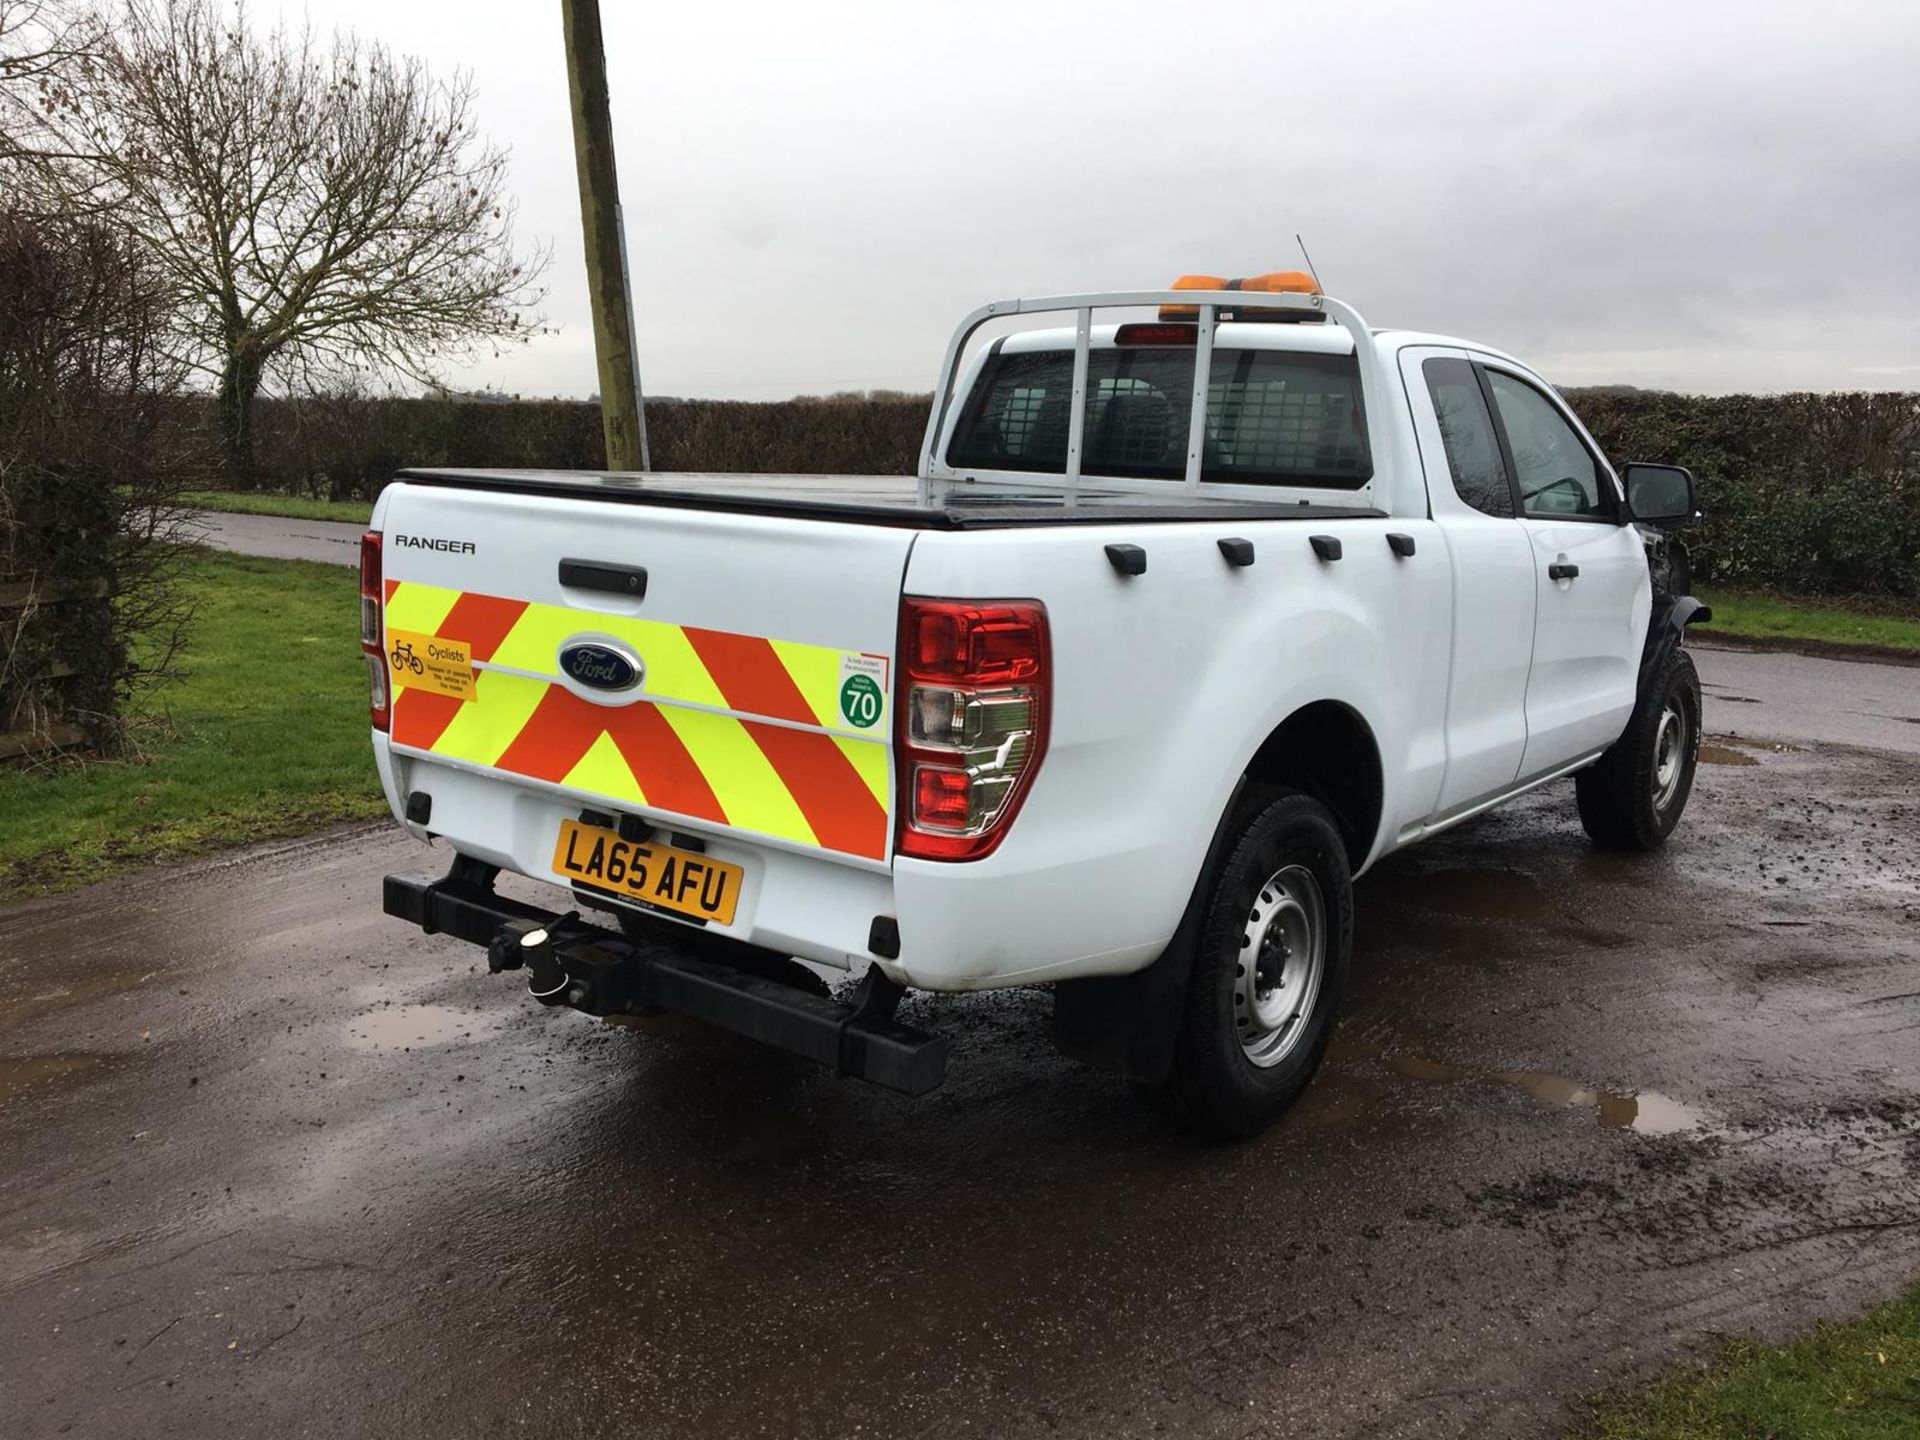 2016/65 REG FORD RANGER XL 4X4 DCB TDCI WHITE DIESEL PICK-UP, SHOWING 0 FORMER KEEPERS *NO VAT* - Image 5 of 9